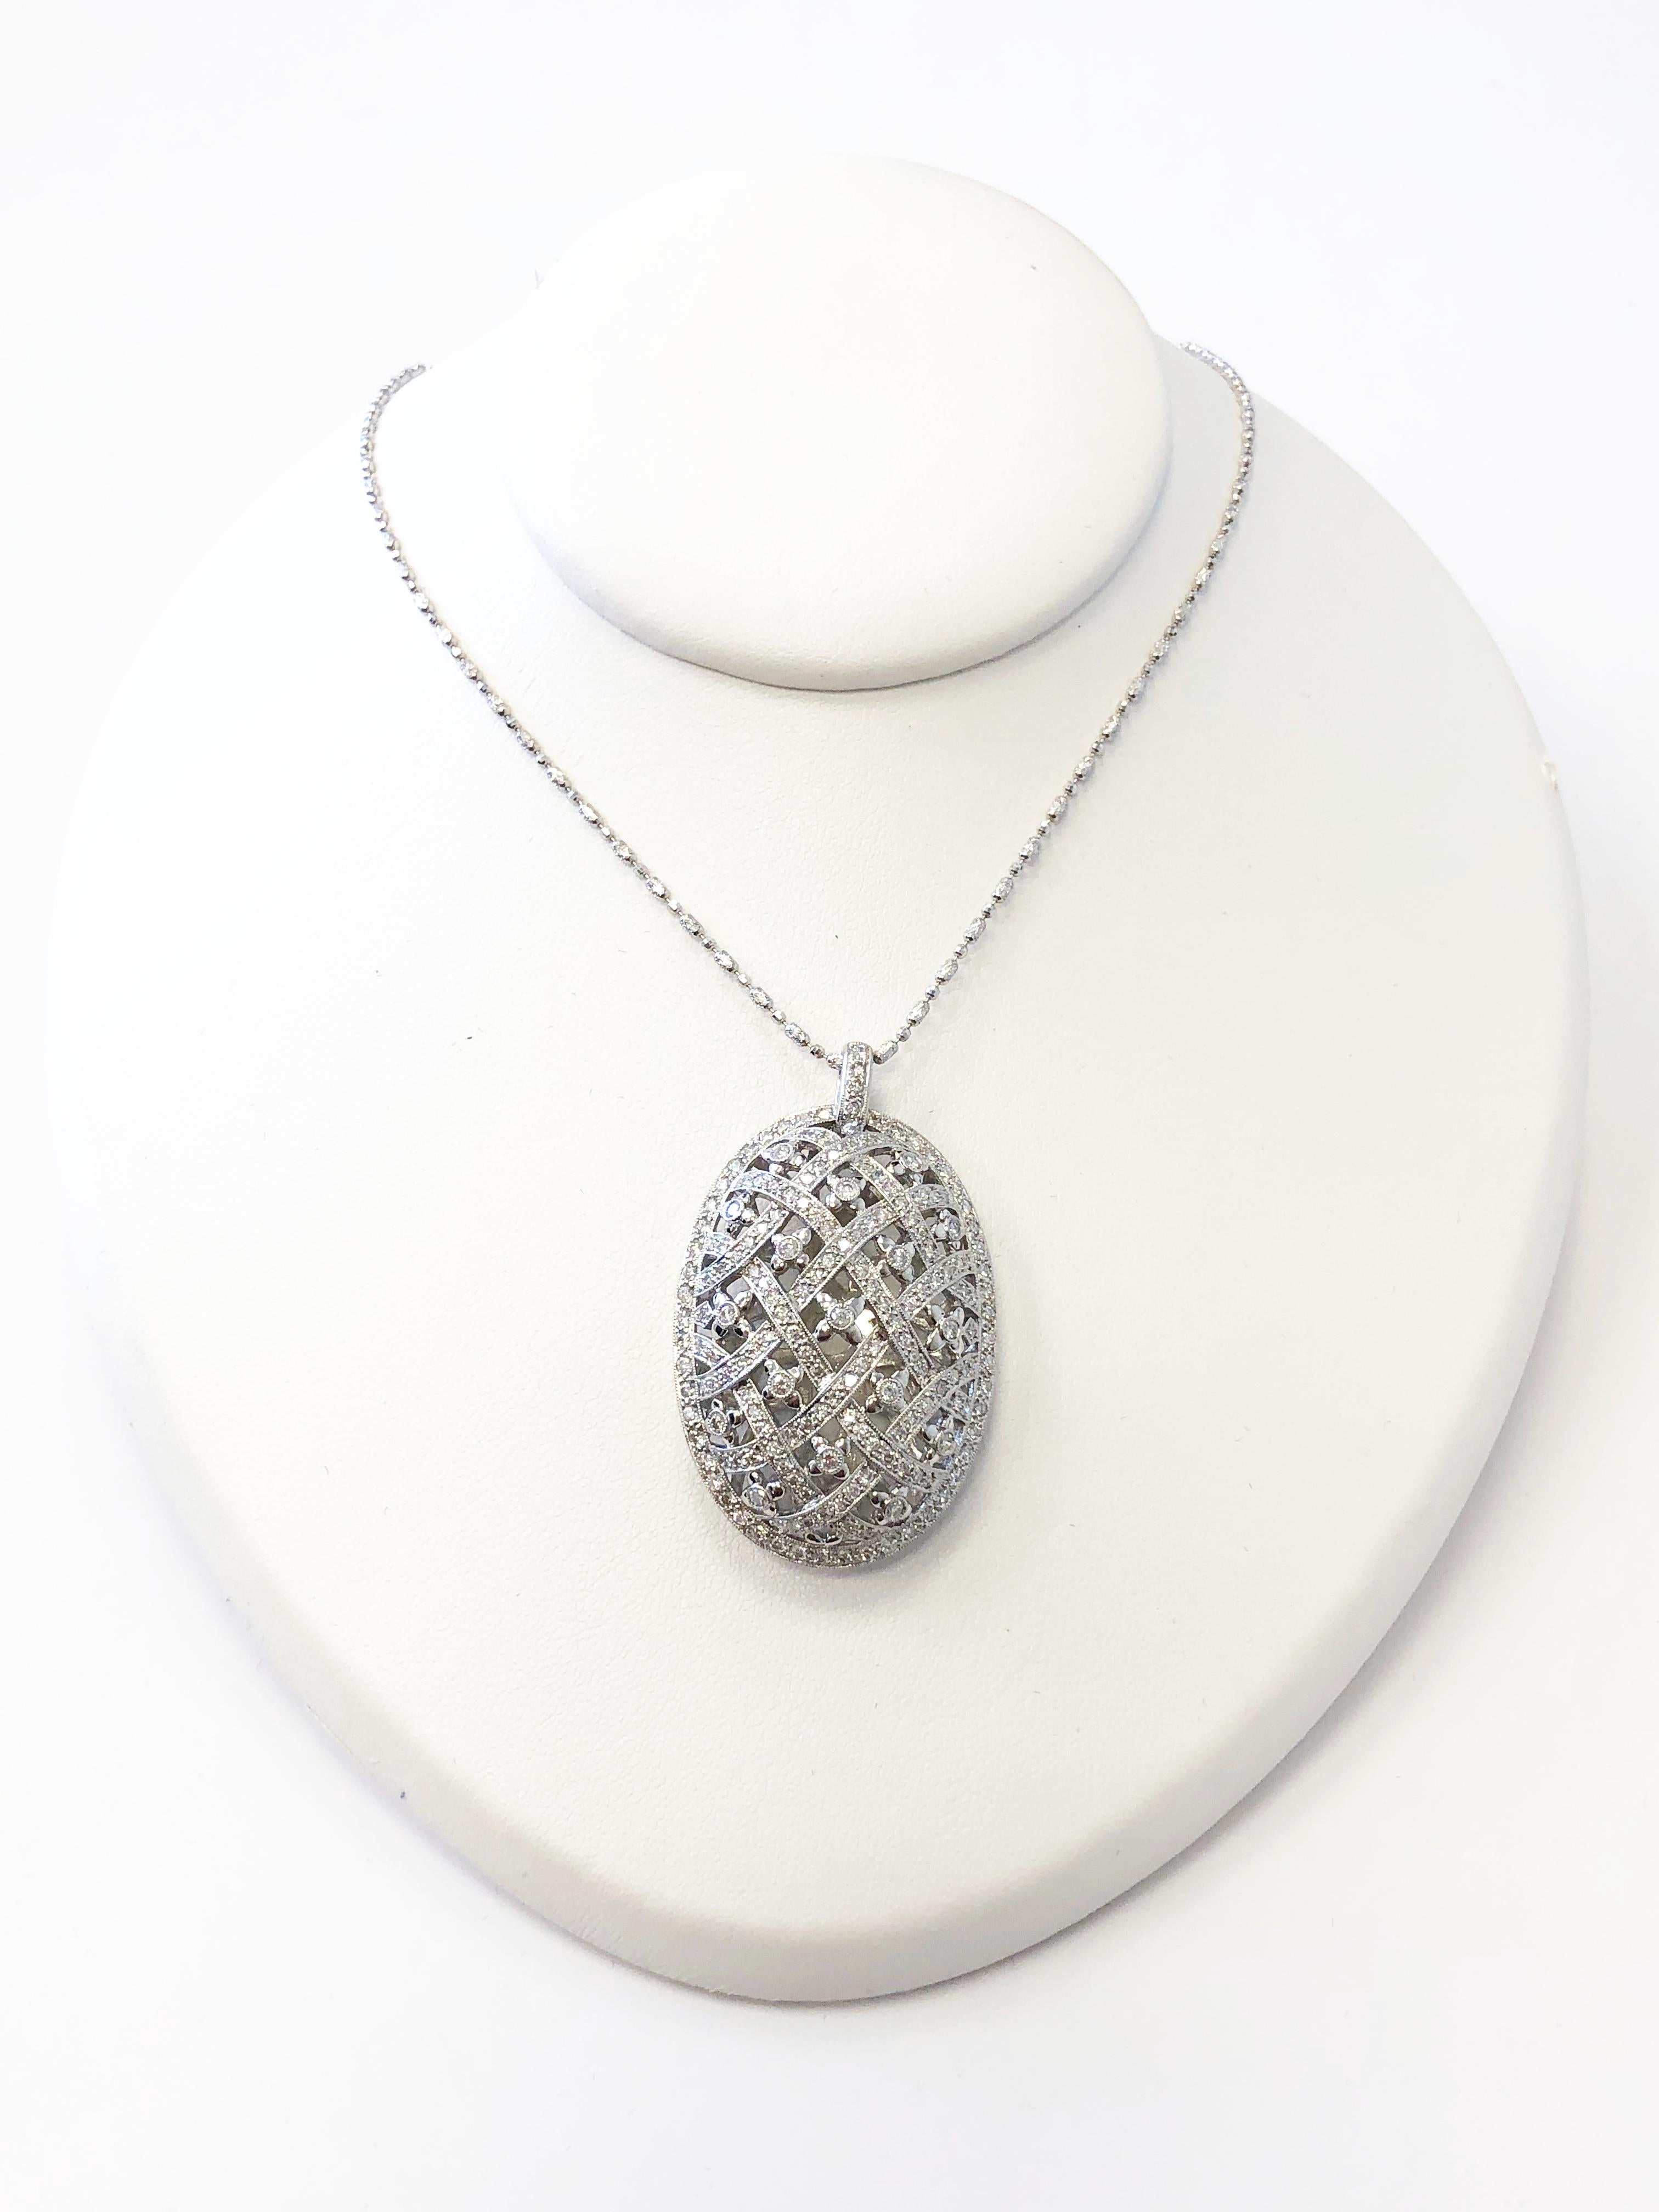 Pretty white diamond oval design pendant necklace with 2.51 carats of good quality bright white diamonds and a handcrafted 18k white gold mounting.  Necklace length is 18